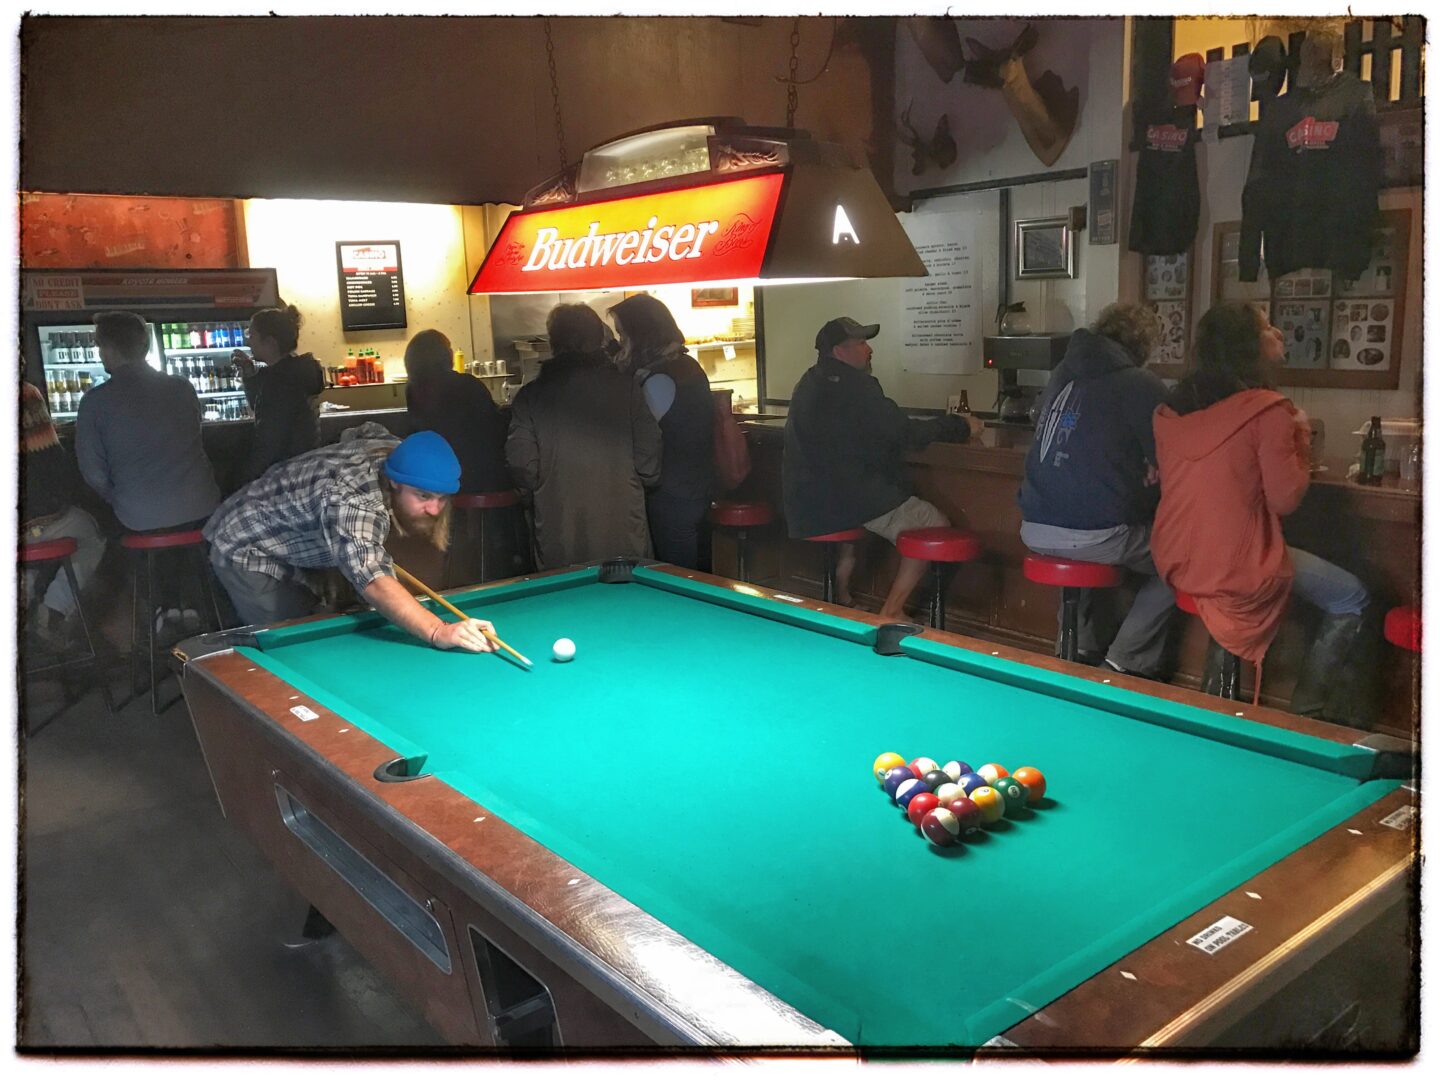 A group of people playing billiards in a bar.